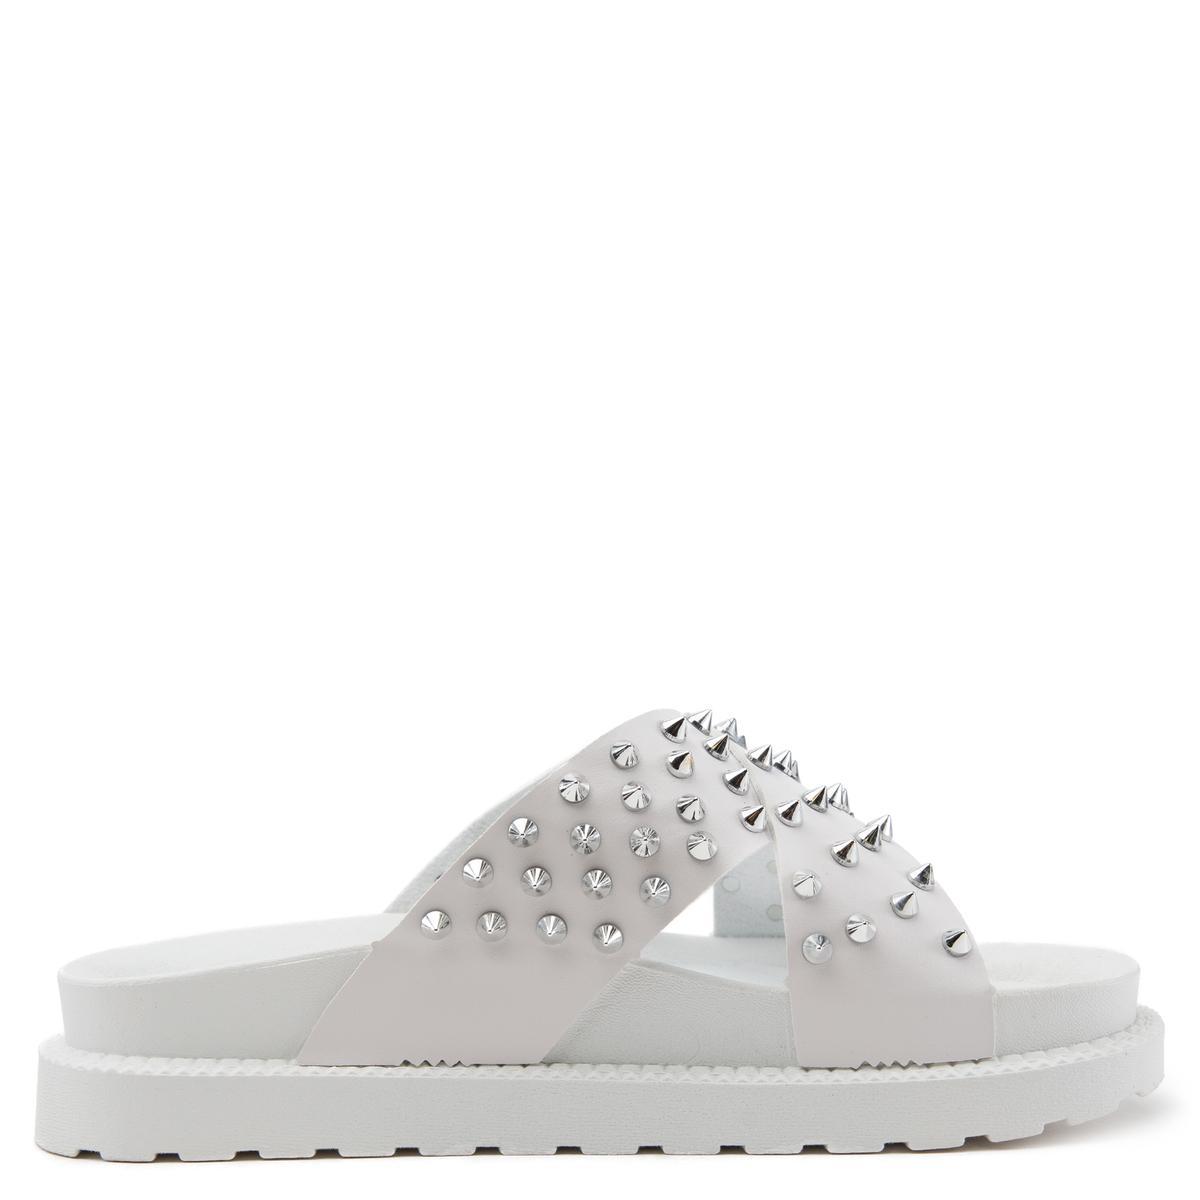 Airy-1 Spiked Upper Sandals